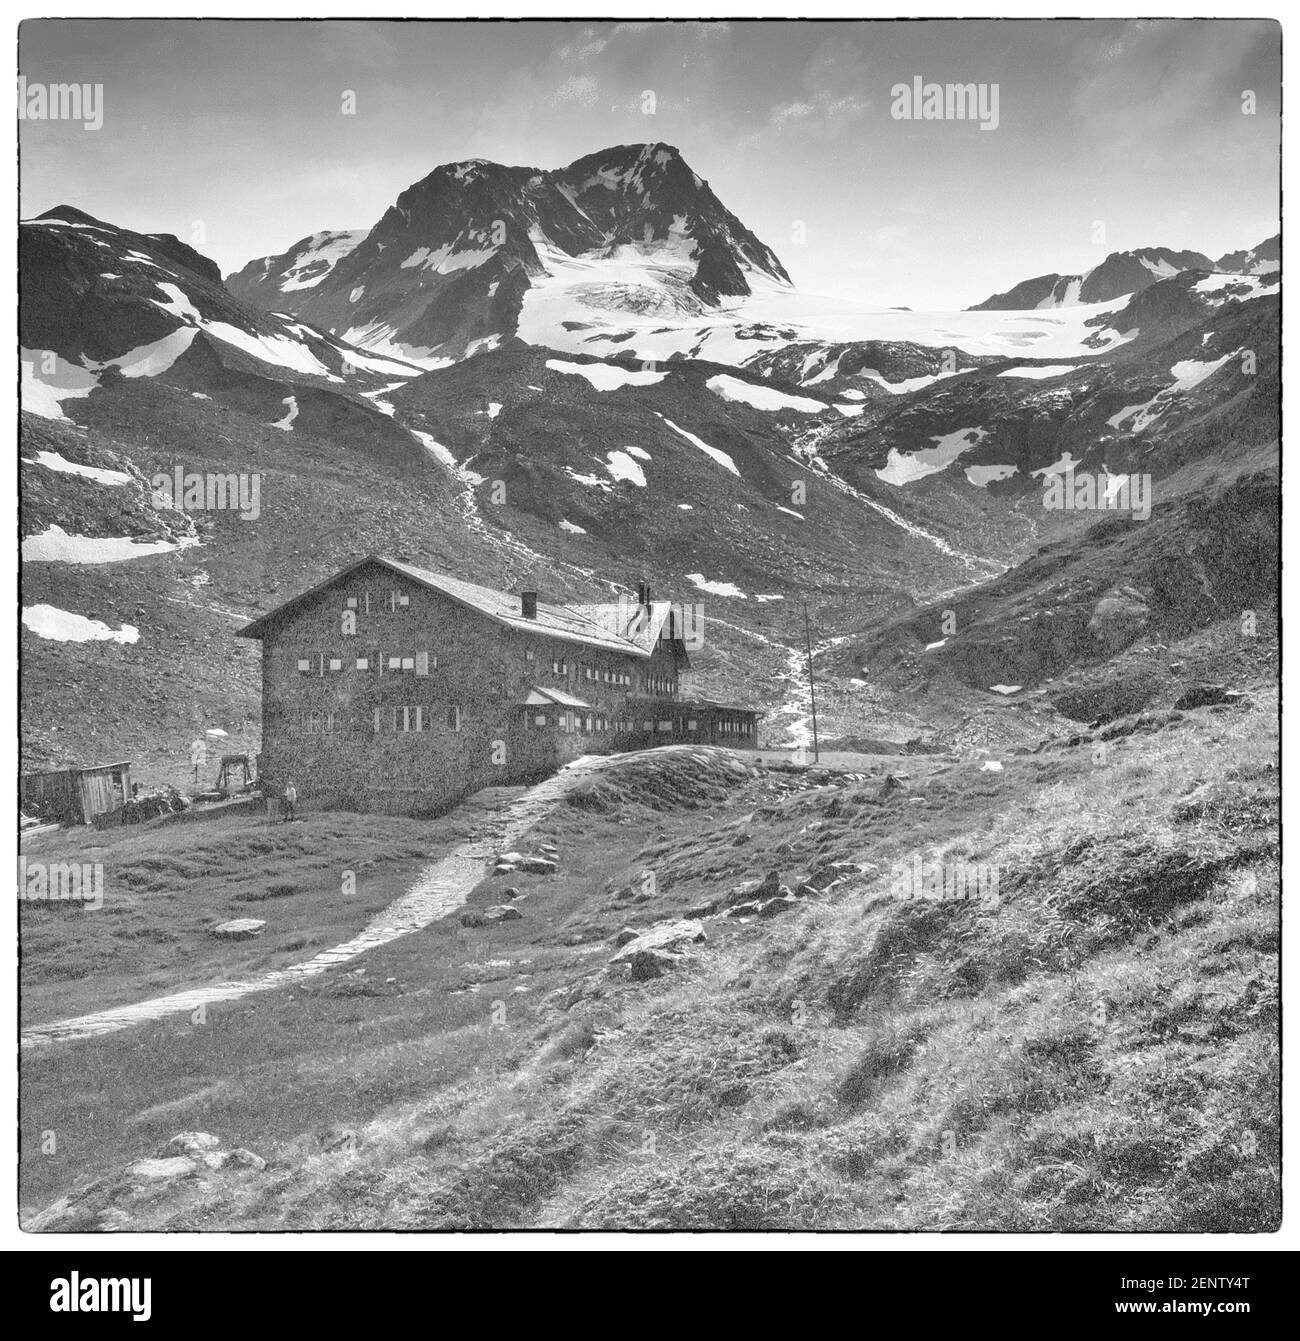 Austria, Tyrol. This is of the German Alpine Club, DAV, Dresden mountain Hut refuge at the head of the Stubaital valley looking towards the Schaufel Spitze mountain as it was in 1968 all prior to when the area was pristine before heavily engineered by the Stubai Glacier Company into a ski area now littered with ski tow pylons, restaurants and cafes. Stock Photo